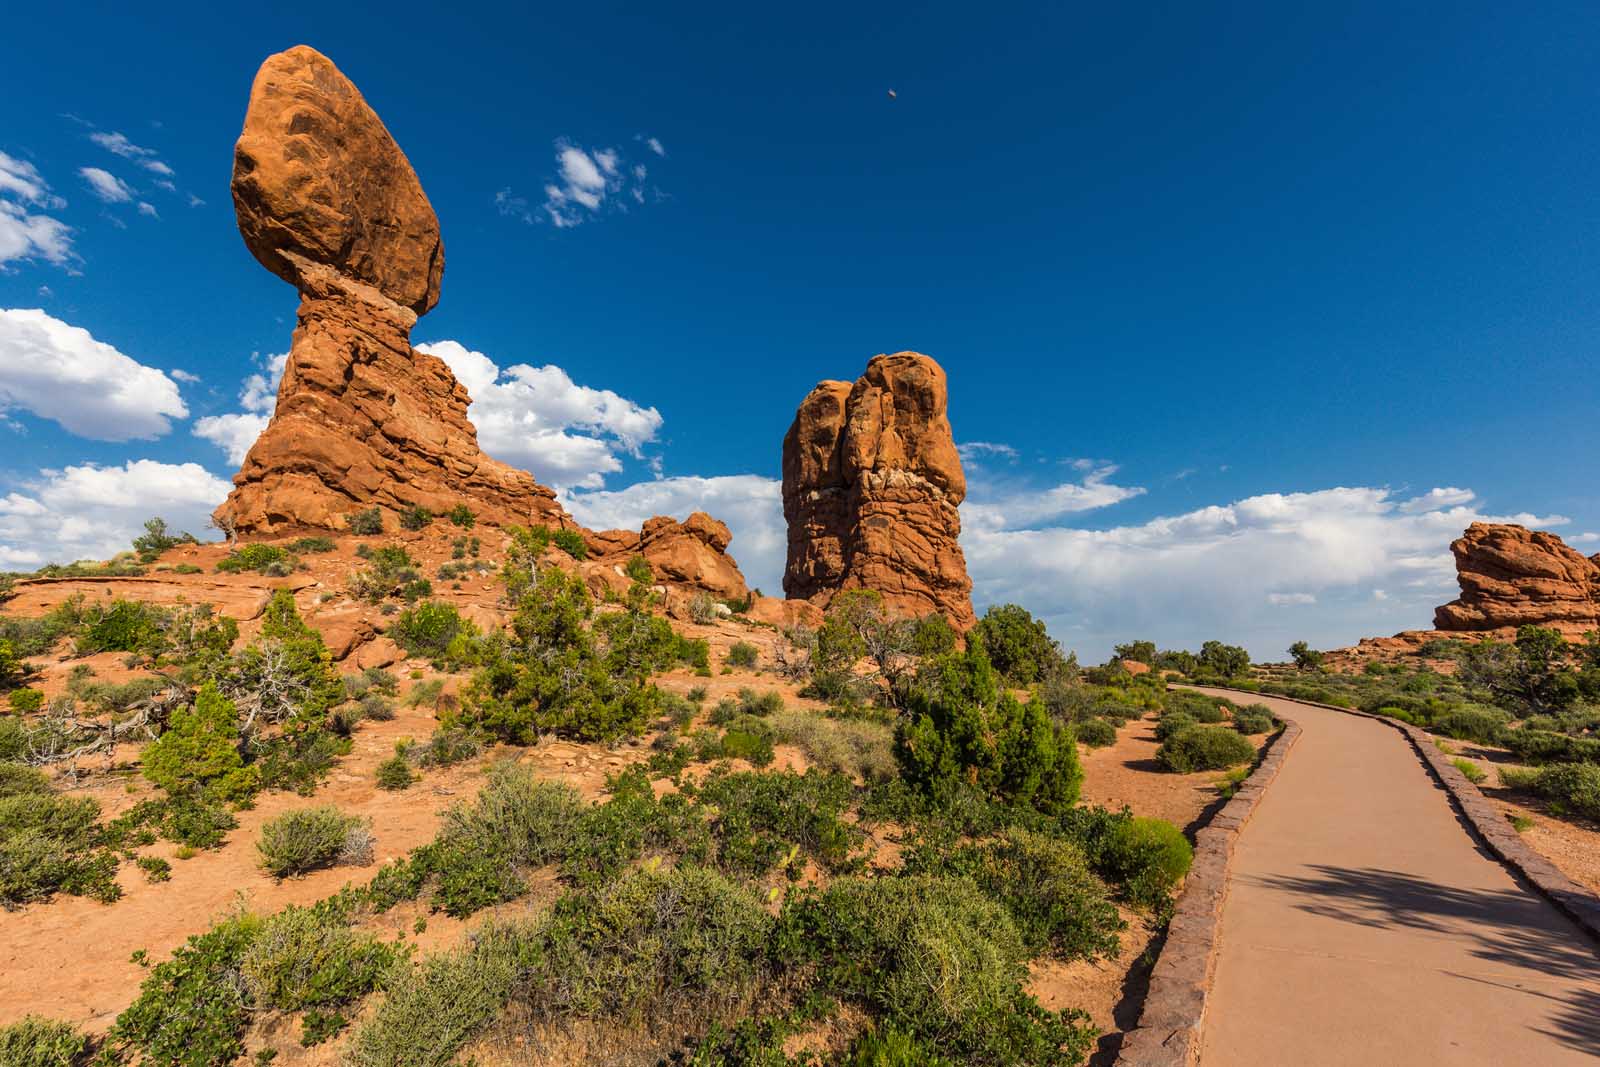 Best Arches National Park Hikes Balanced Rock Loop Trail